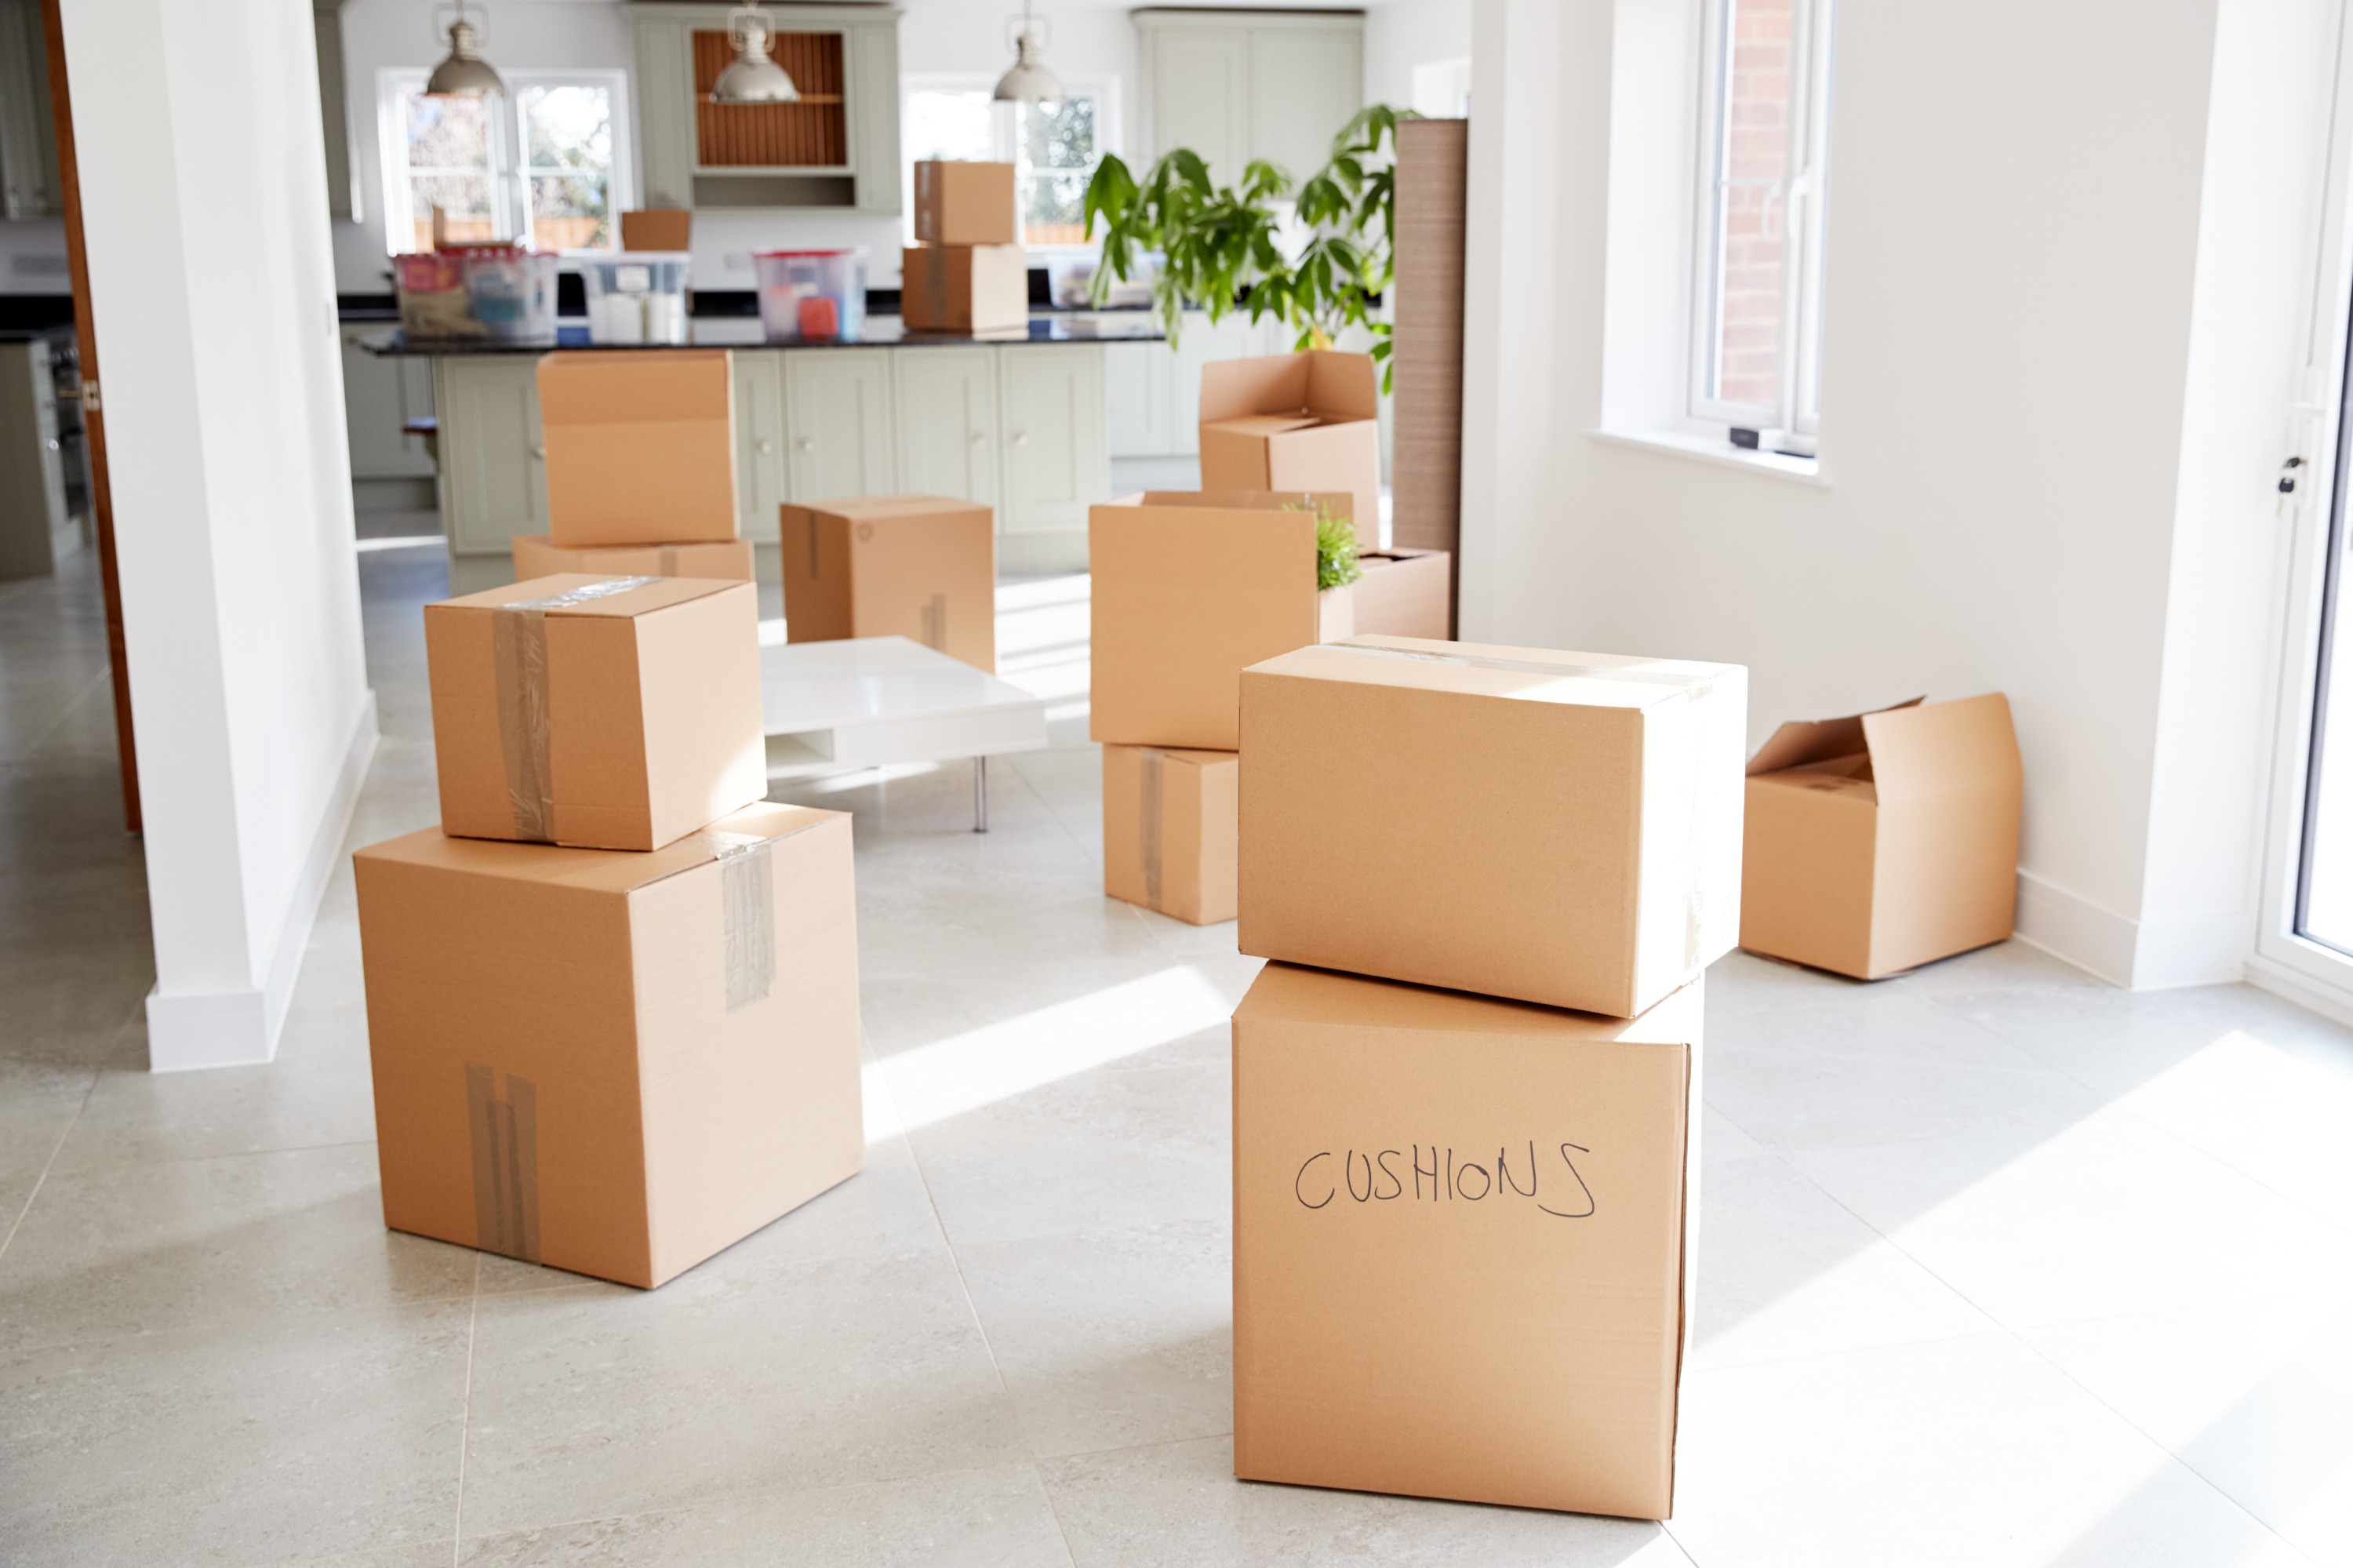 Brown cardboard moving boxes in a bright kitchen area with white walls and green plants.